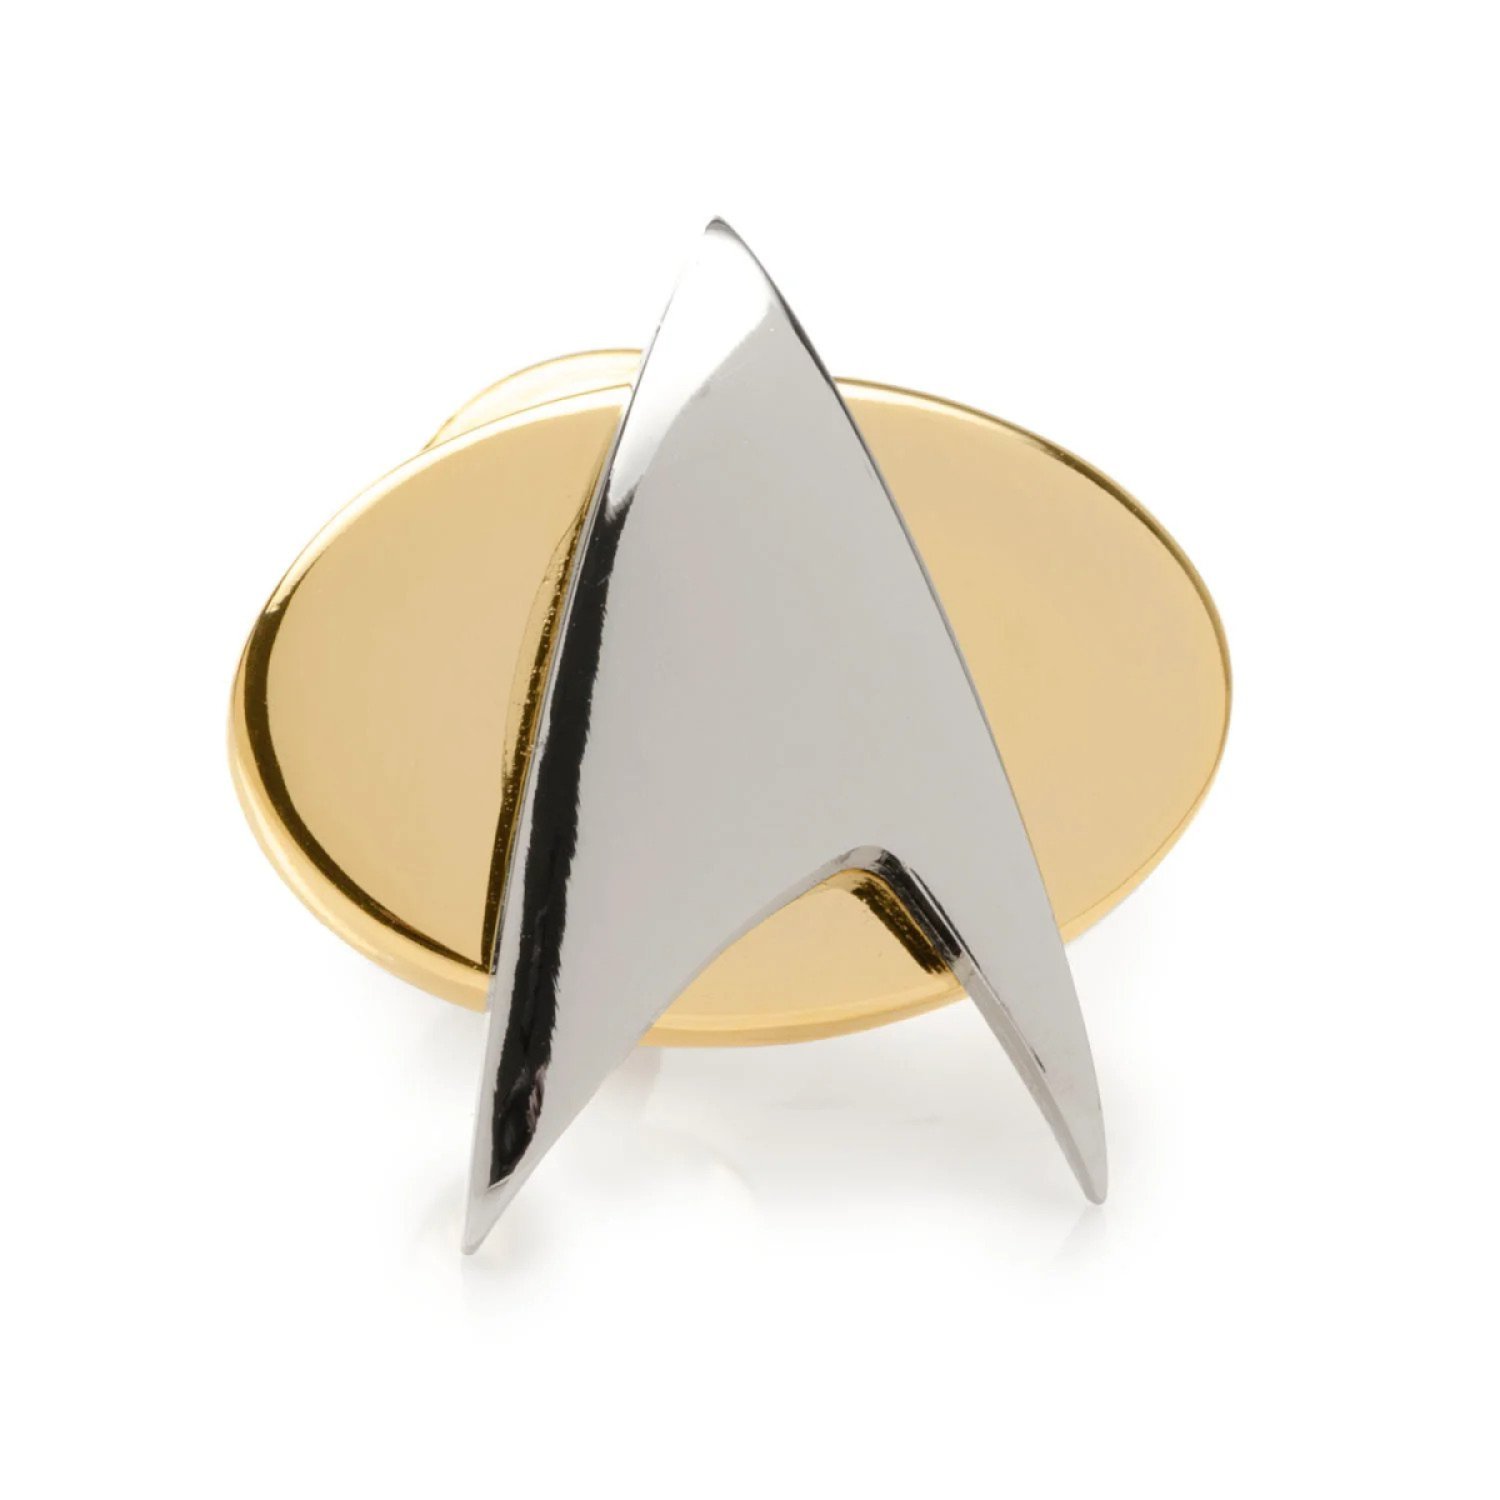 What are some of the best Star Trek gifts/items you have ever